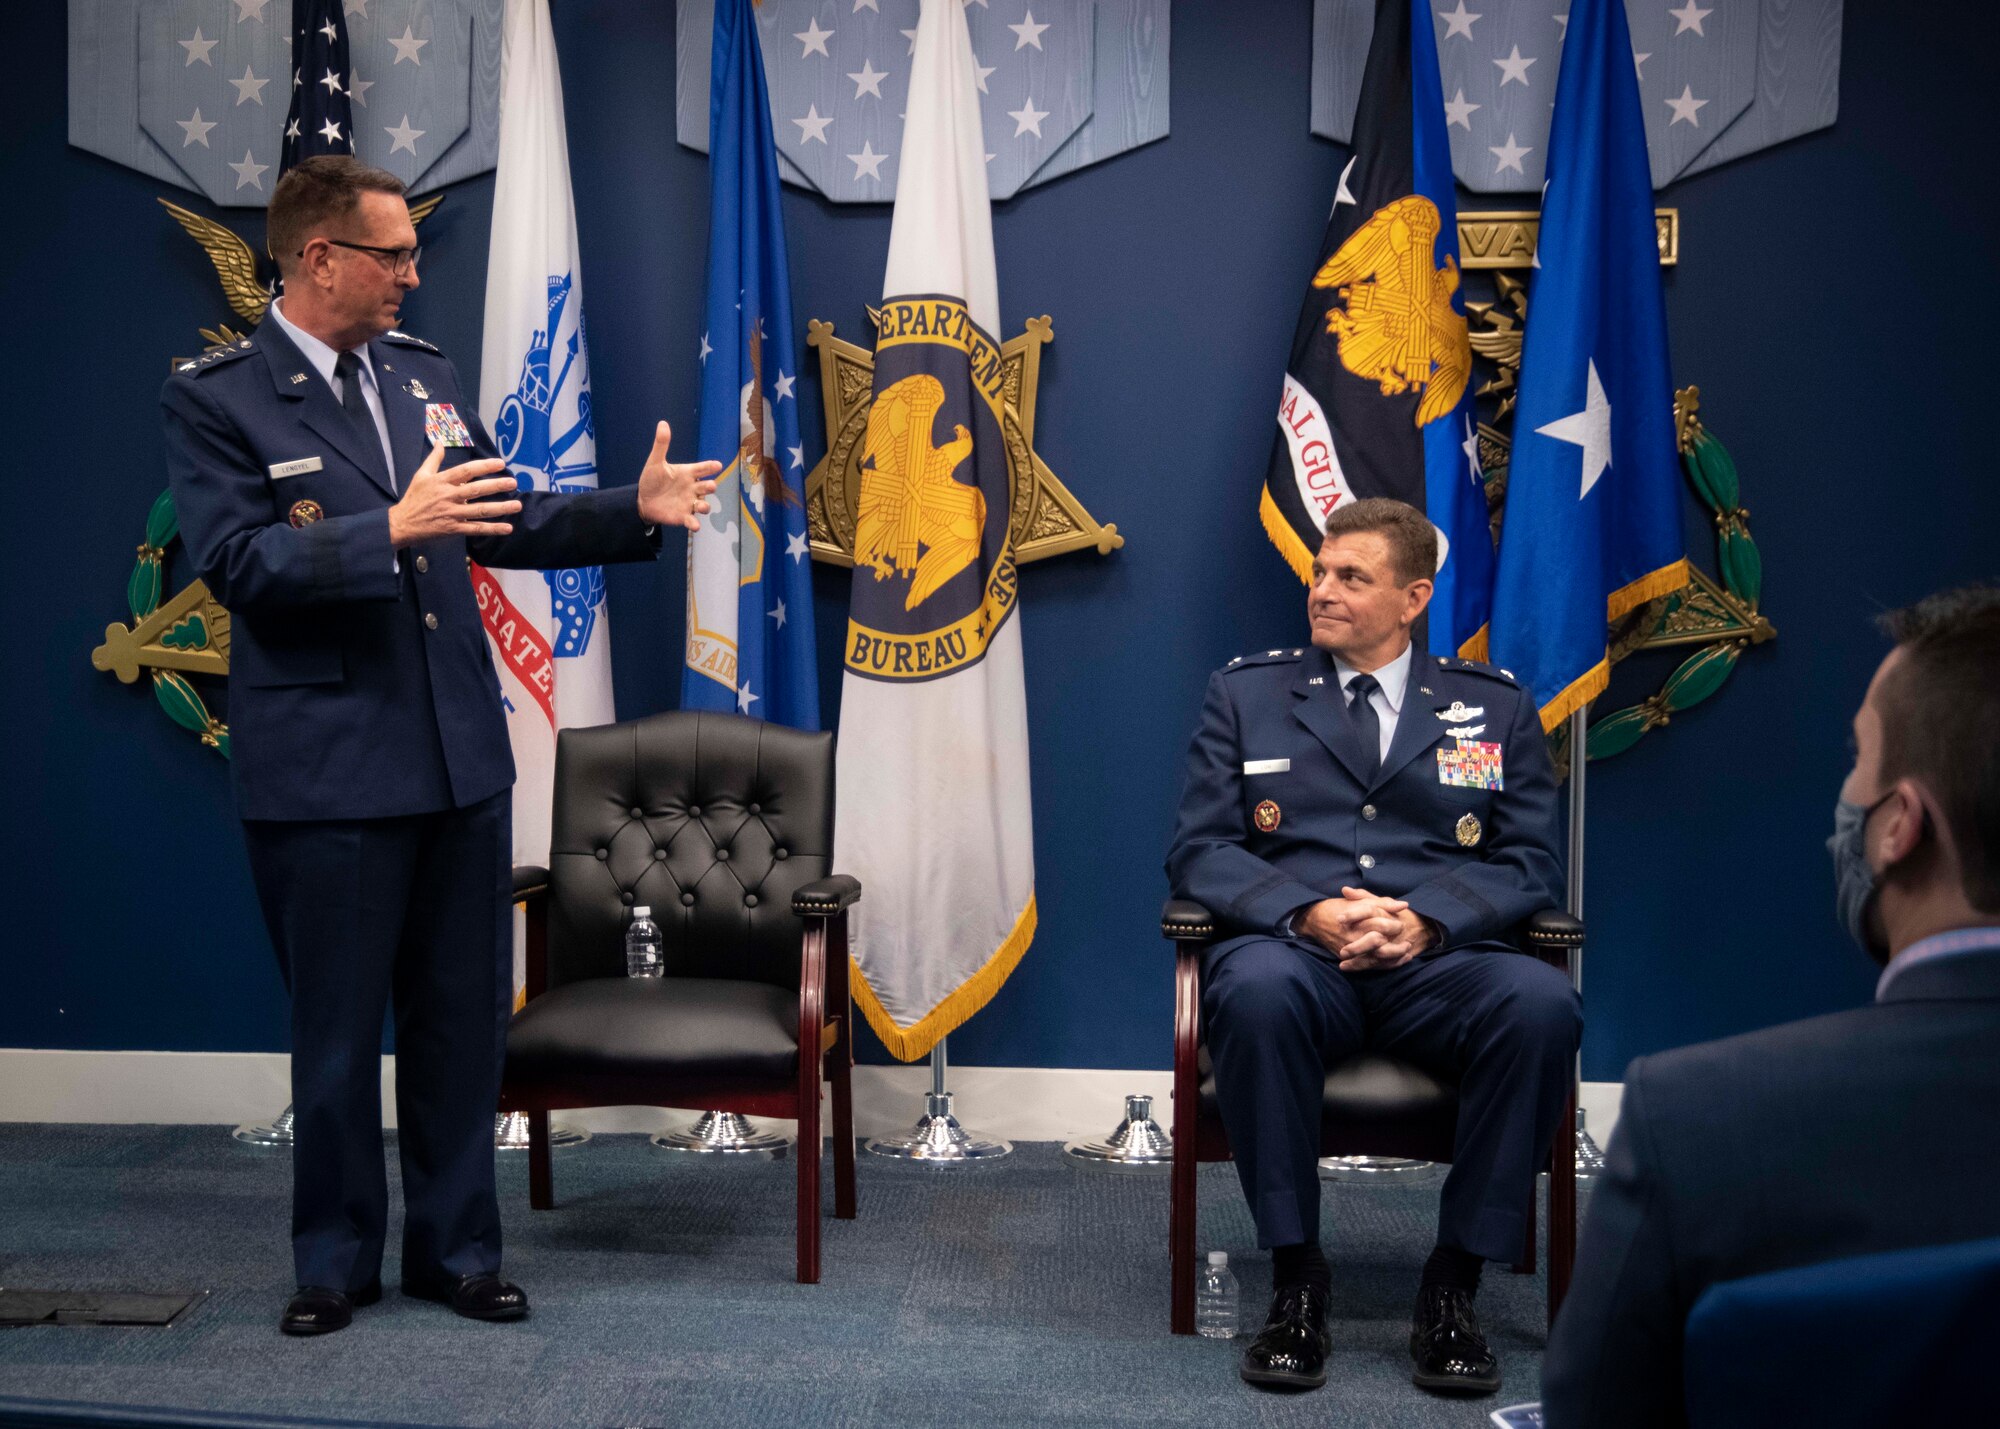 U.S. Air Force Gen. Joseph L. Lengyel, the 28th Chief of the National Guard Bureau, speaks during a Change of Responsibility ceremony for Maj. Gen. Michael A. Loh at the Pentagon July 28, 2020. During the ceremony, Loh assumed responsibility as the 13th director of the Air National Guard and was promoted to the rank of lieutenant general. (U.S. Air National Guard photo by Technical Sgt. Morgan R. Lipinski)